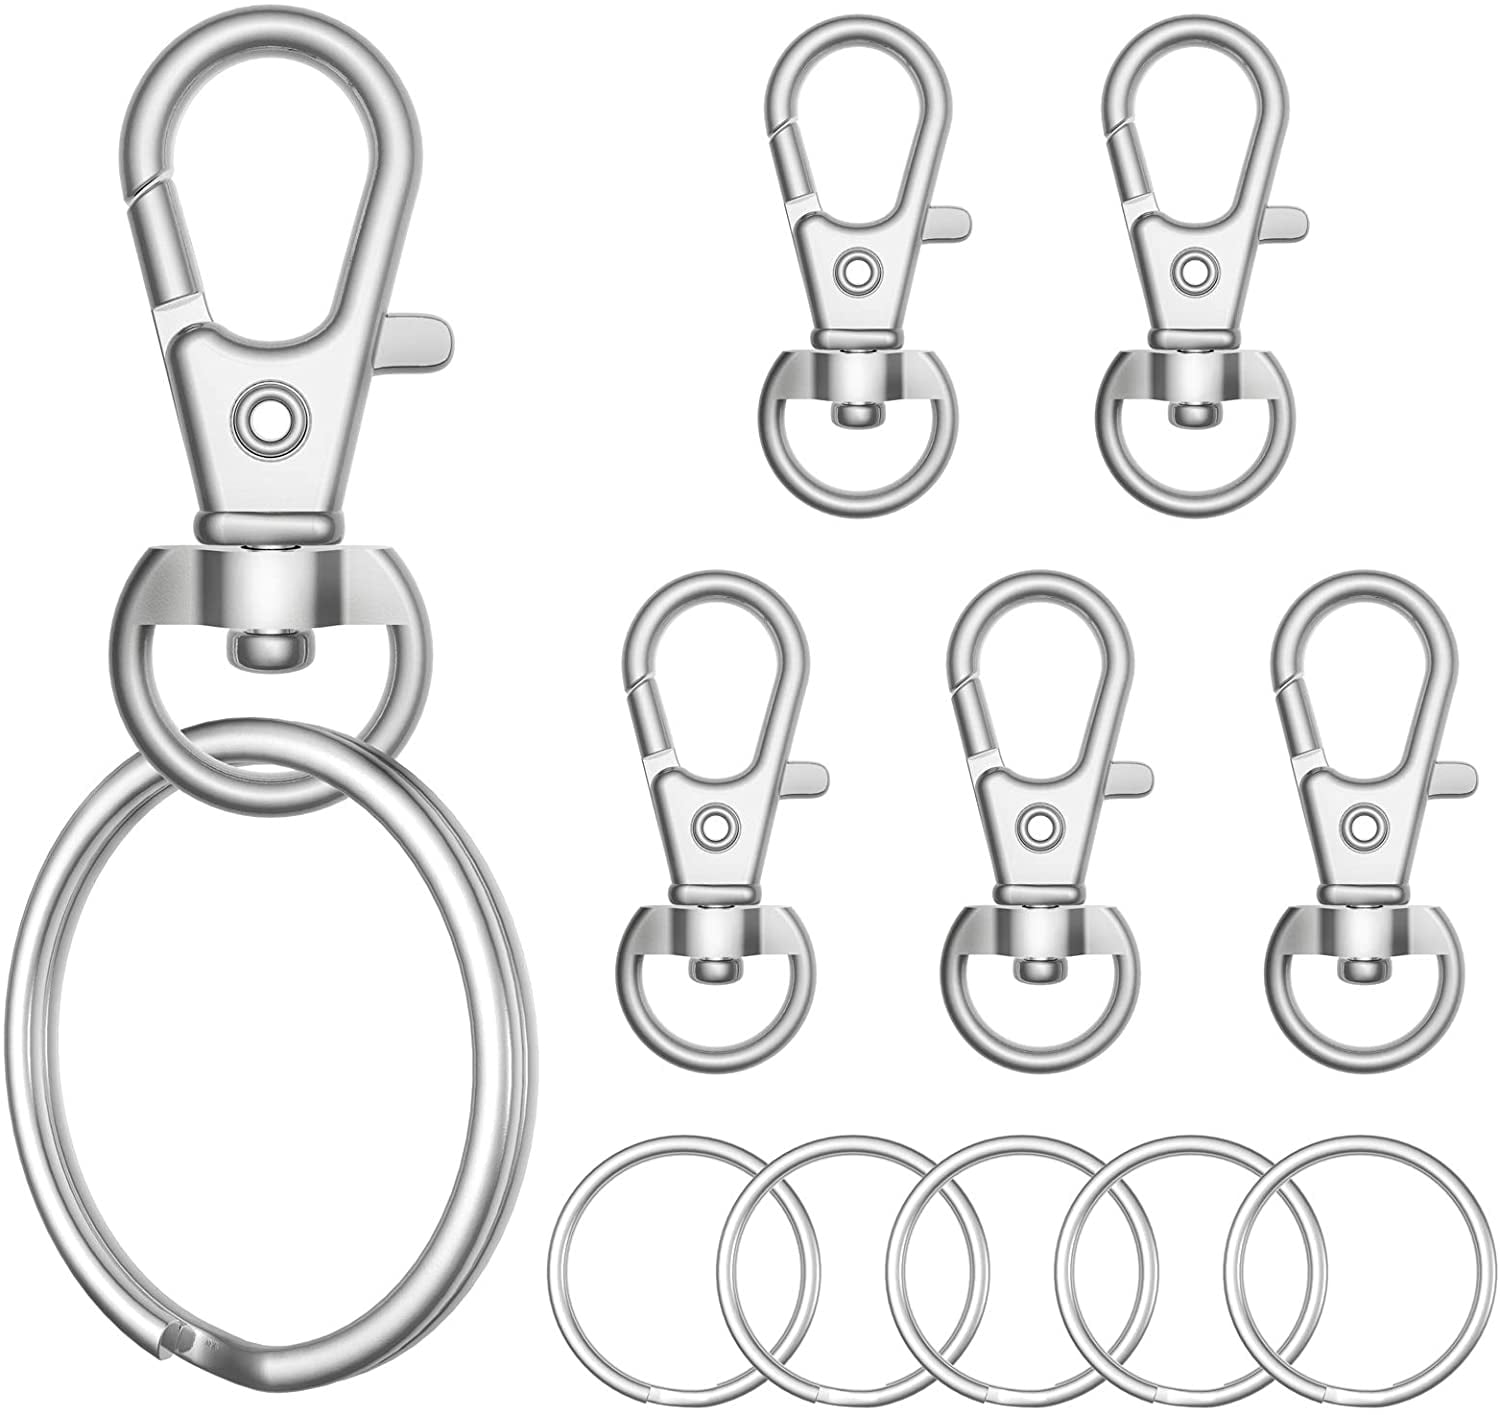 50 Pack Metal Swivel Clasps Lobster Claw Clasp Lanyard Snap Hook 1 5/8 x 1 (Wide 3/4 D Ring) with 50 Key Rings - Jewelry Findings or Sewing Projects